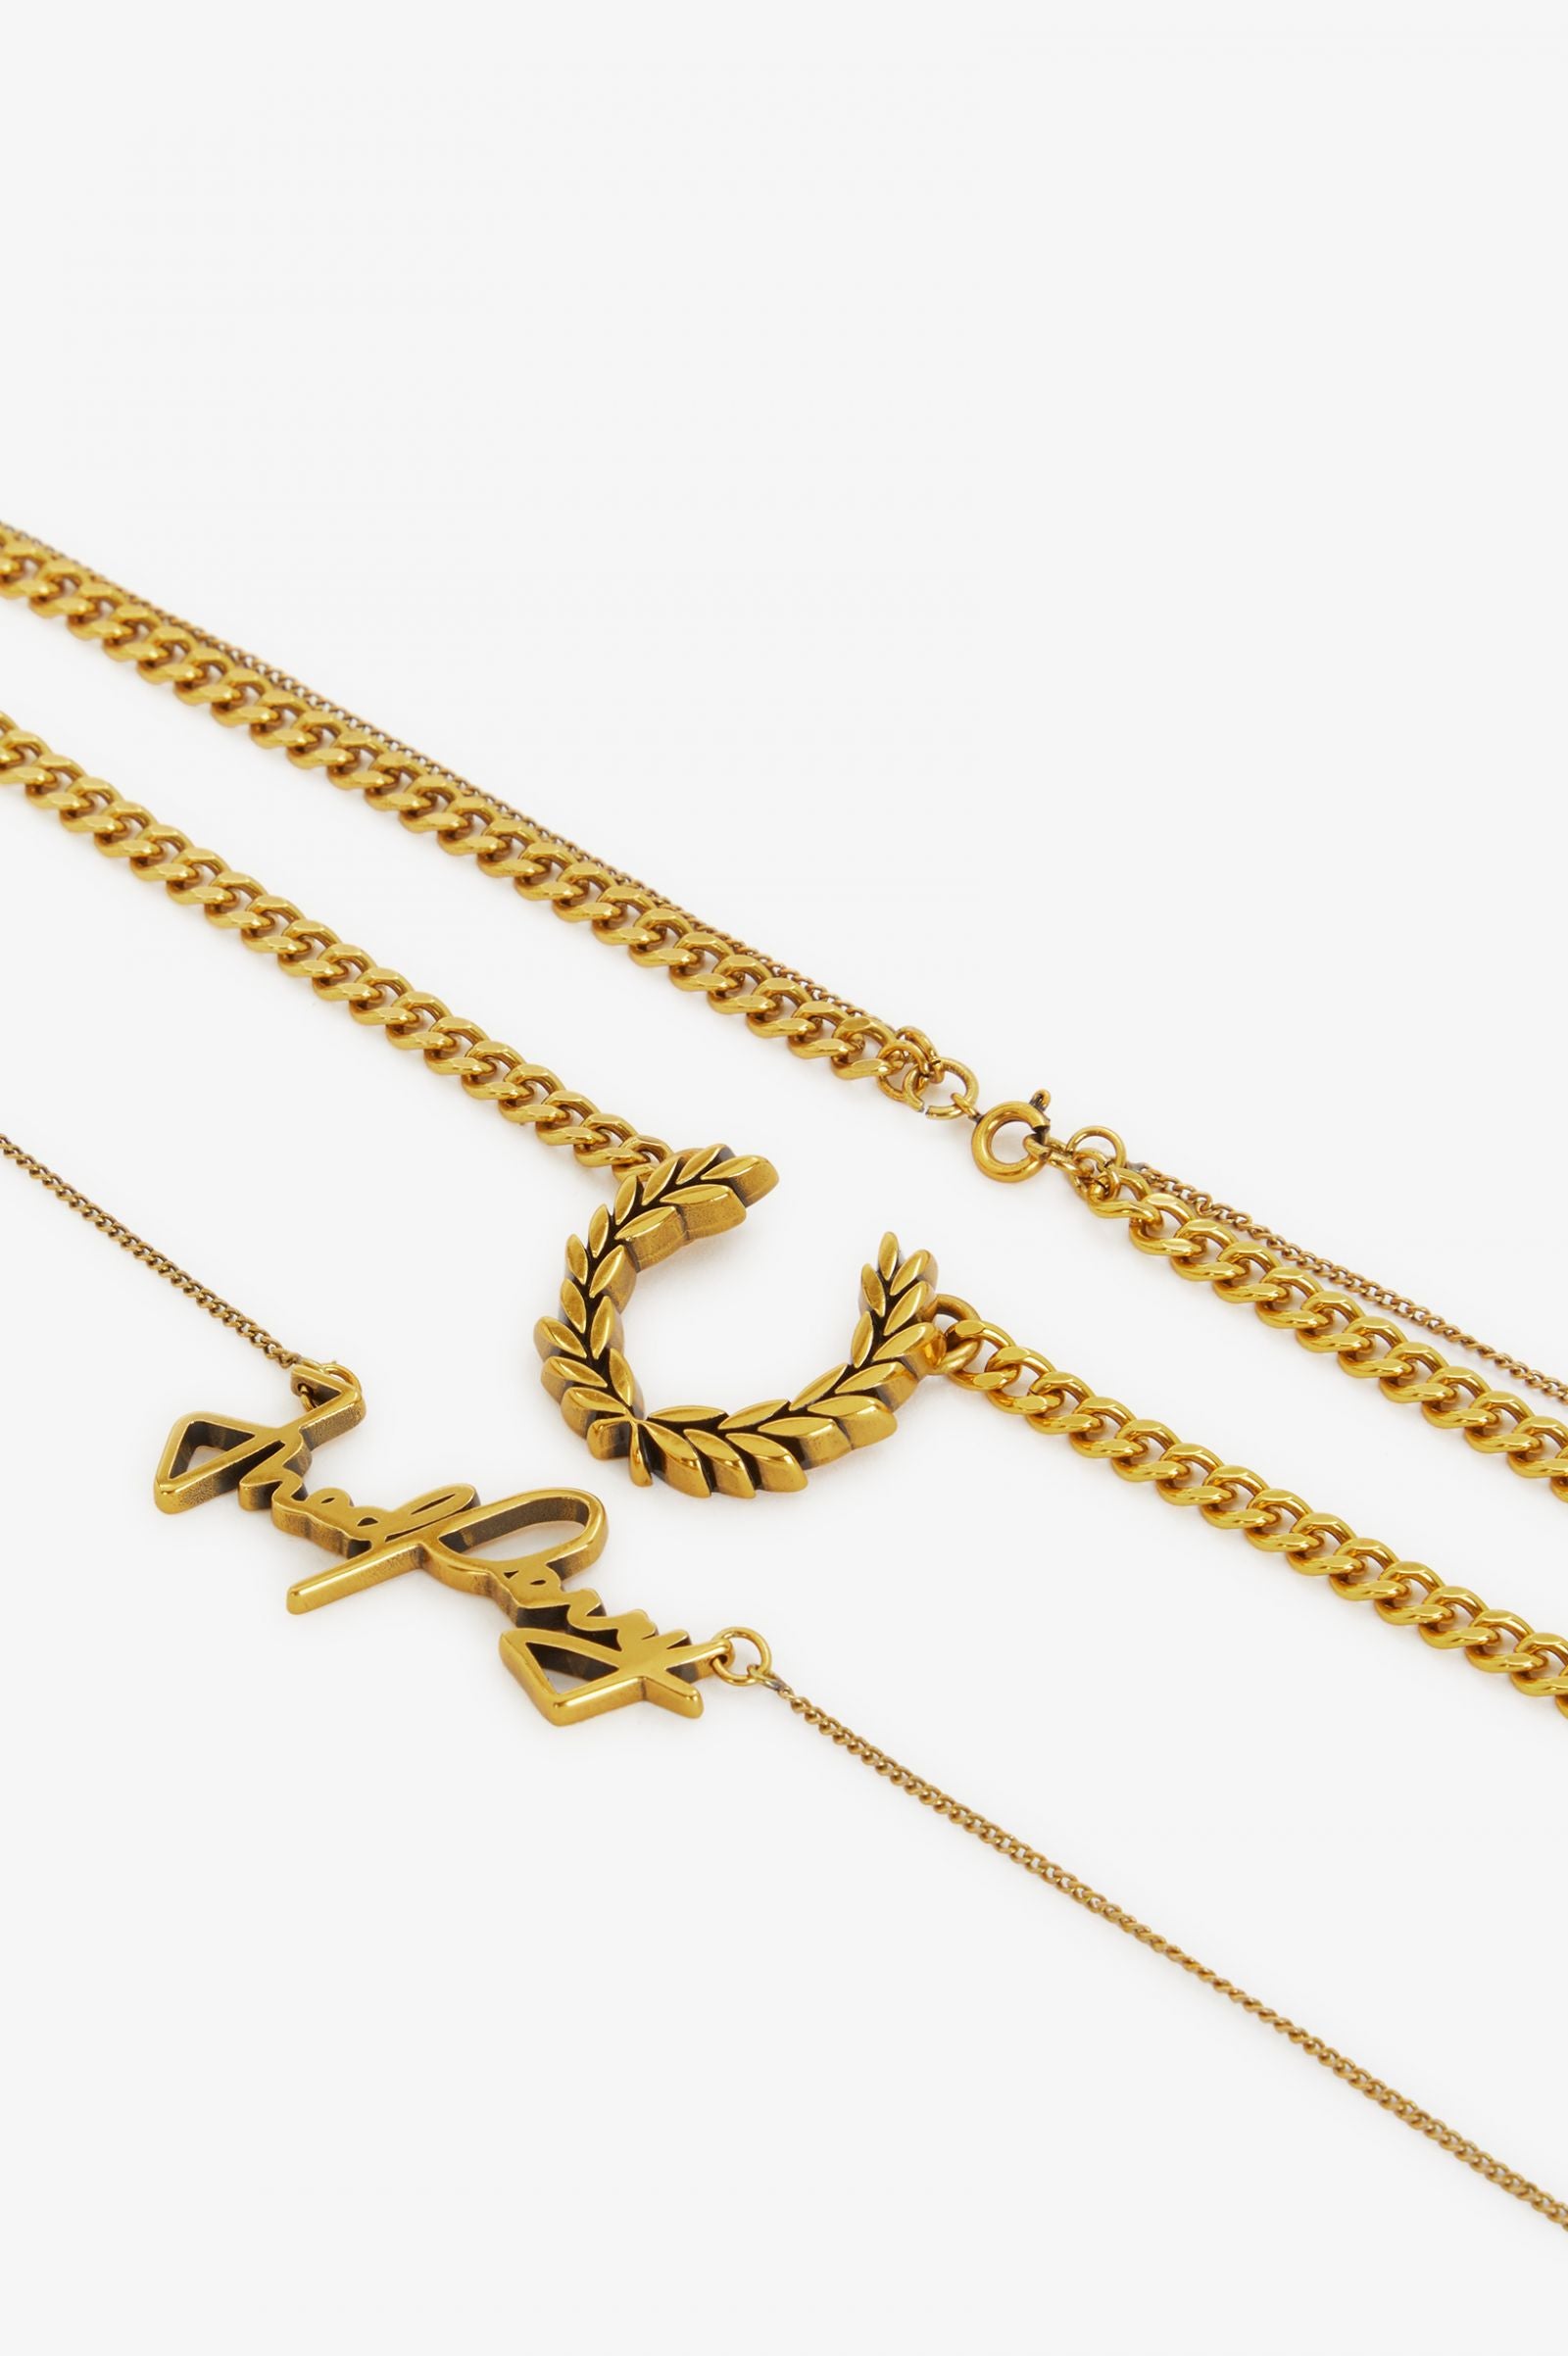 MS Double Chain Combo Necklace | Women's Luxury Boutique in Glencoe, IL -  Shop Designer Clothing, Jewelry, Accessories and More